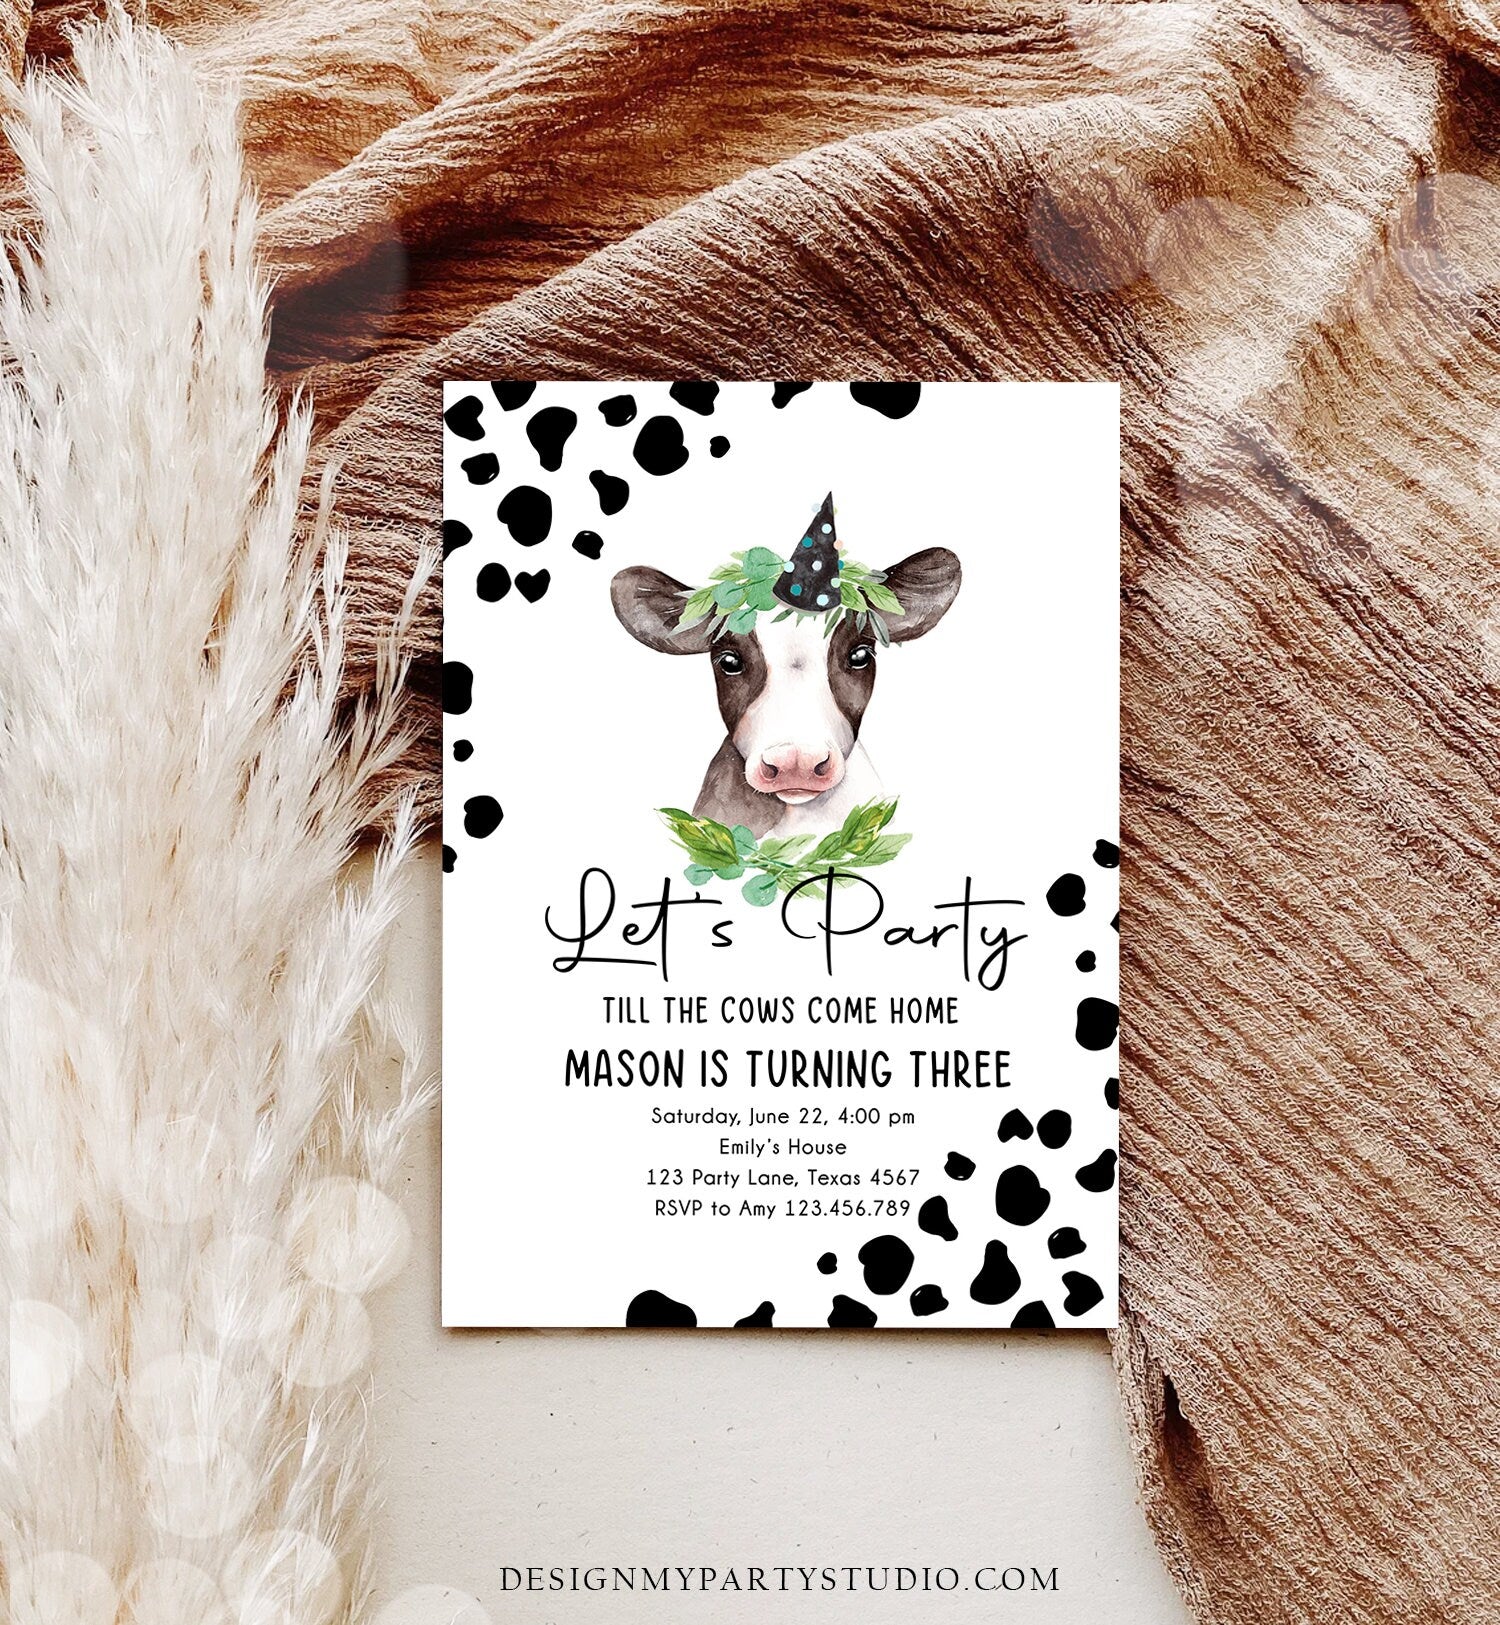 Editable Cow Birthday Invitation Boy Farm Animals Let's Party Till The Cows Come Home Holy Cow 1st Download Printable Template Corjl 0434